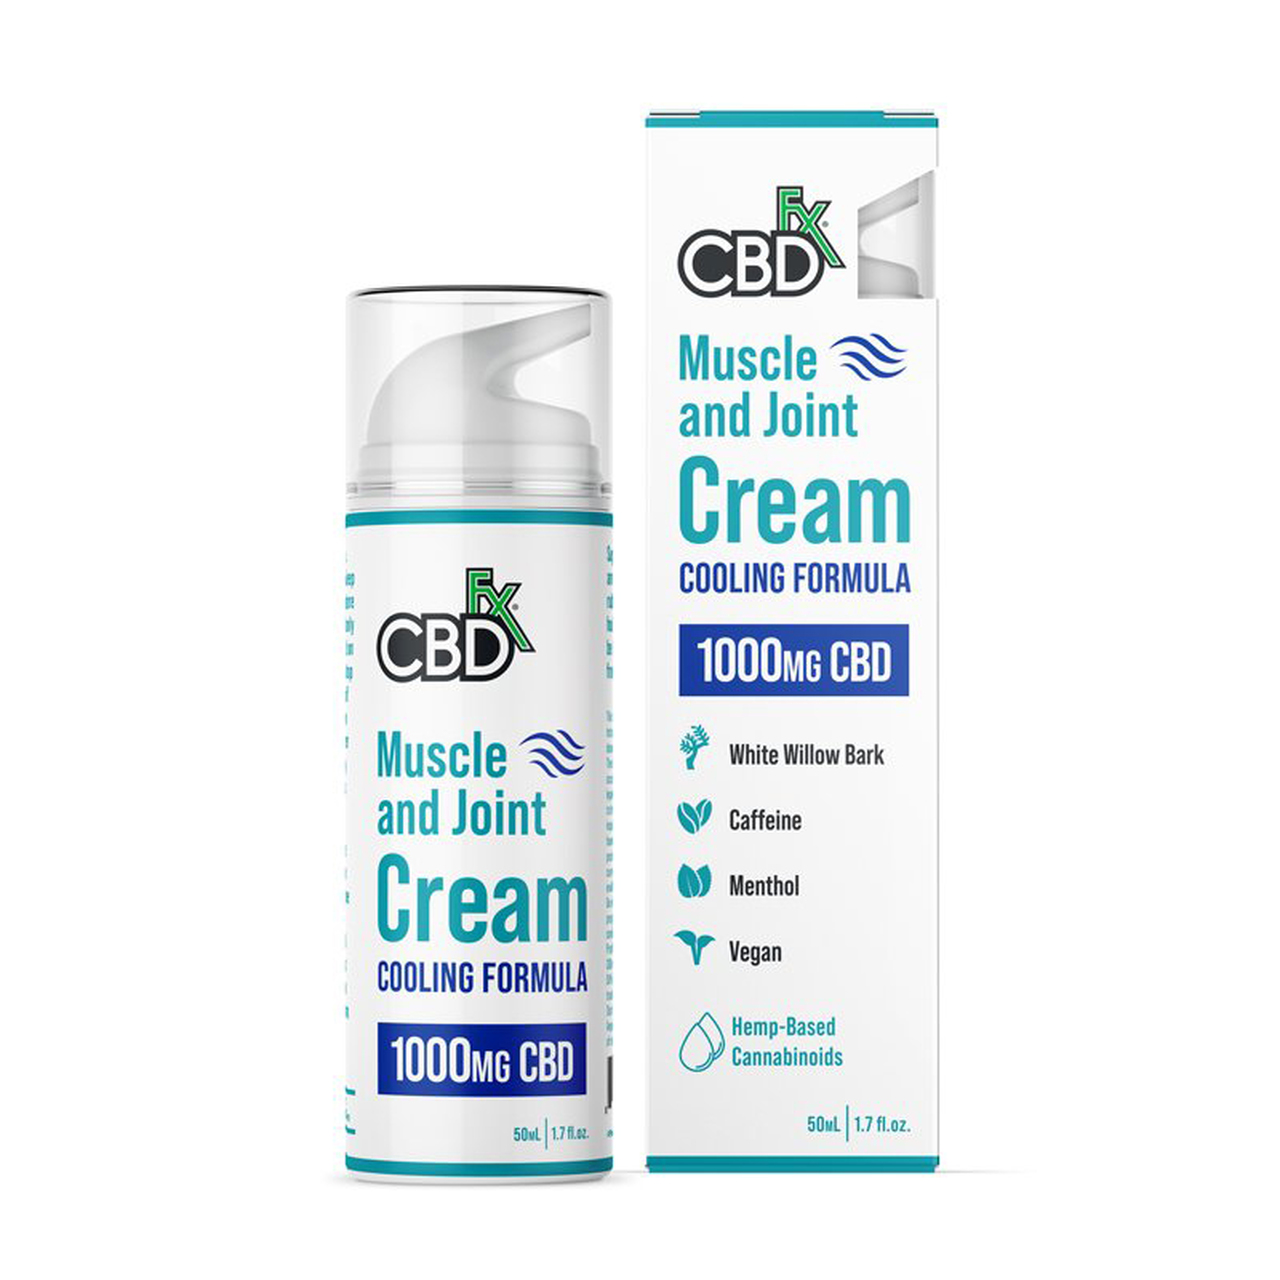 CBDfx 1000mg Broad Spectrum CBD Muscle and Joint Cream Cooling Formula 50ML